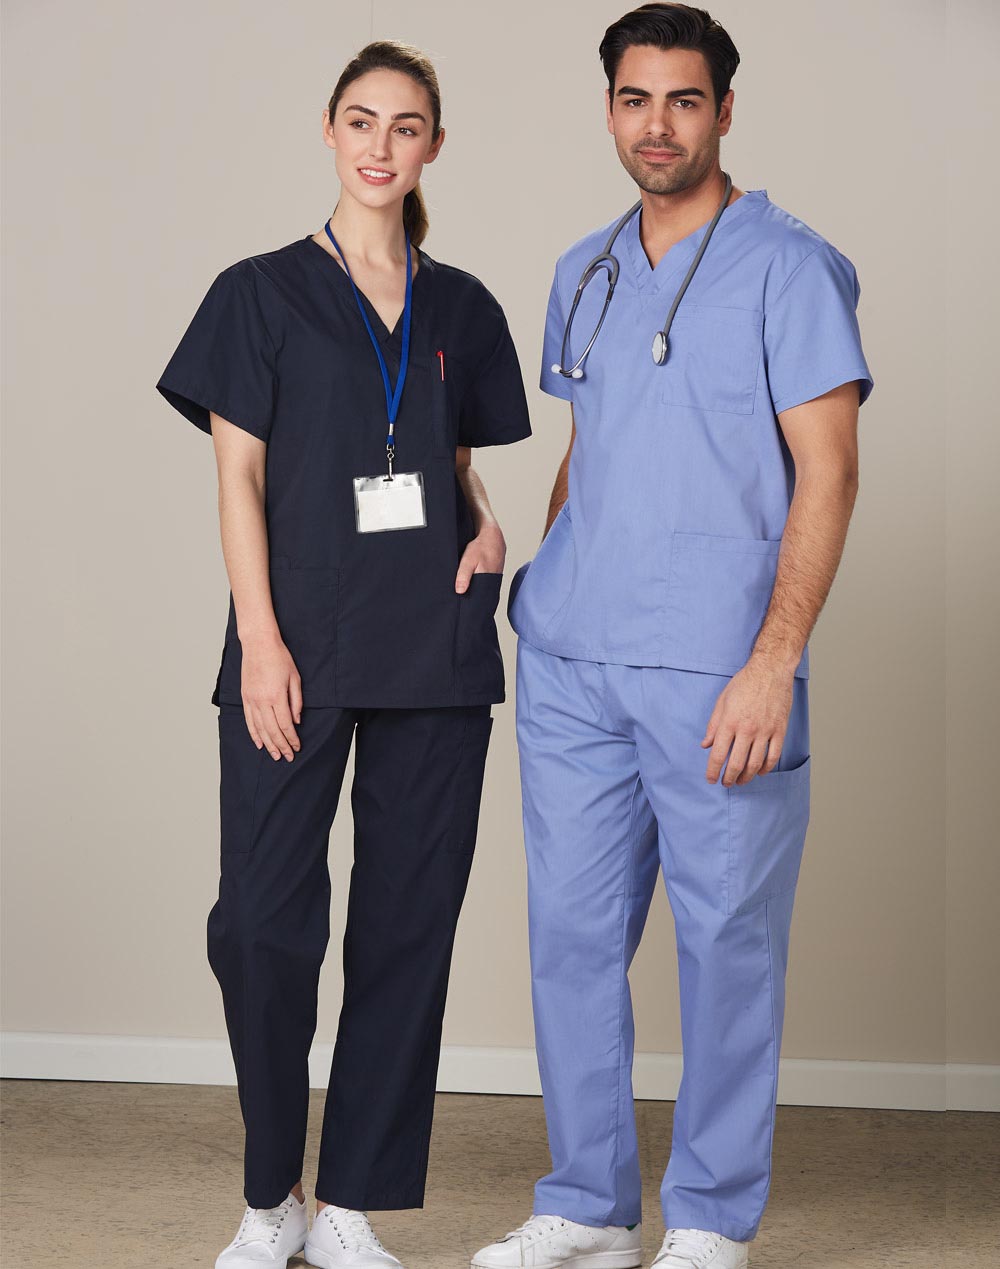 Medical Practitioners Wear Scrubs